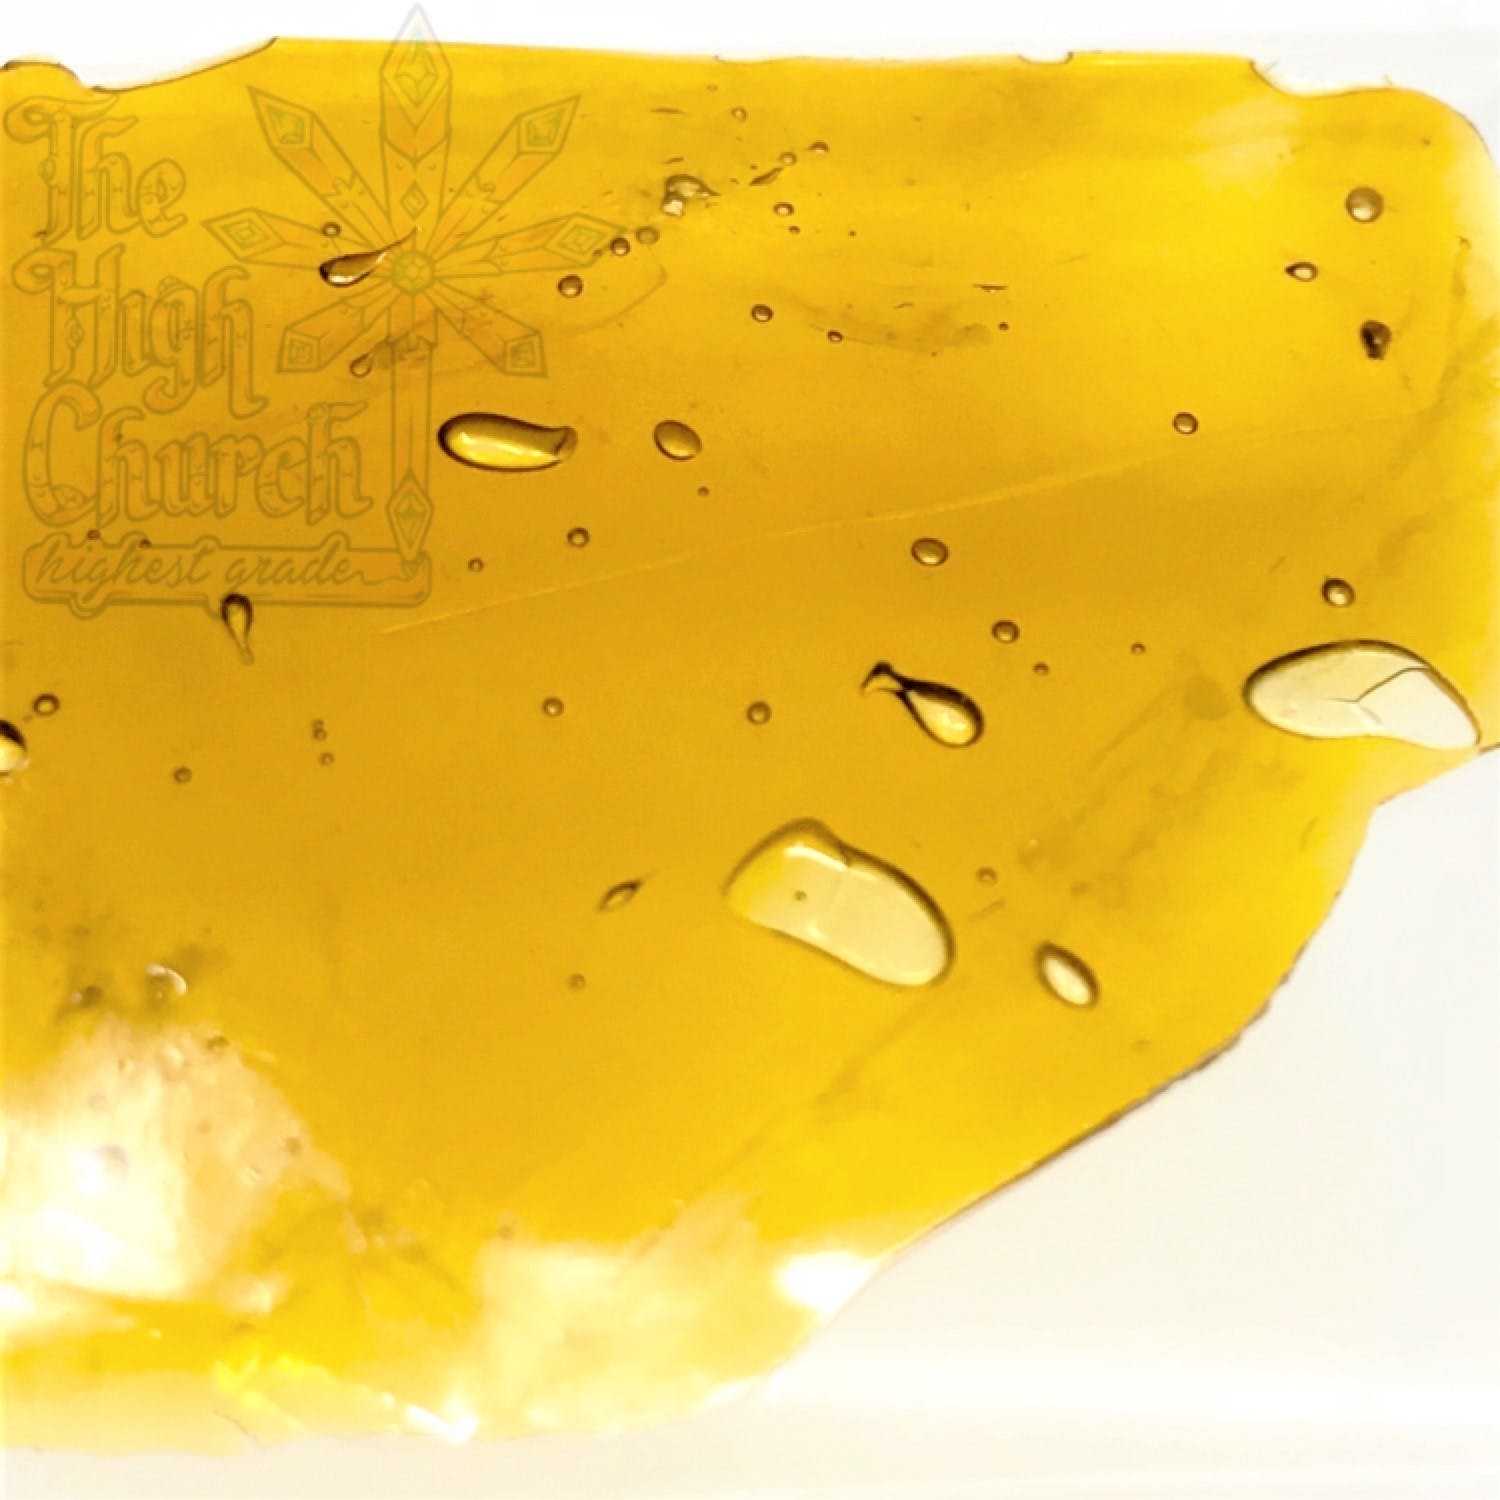 concentrate-shaman-extracts-wifi-og-dewaxed-shatter